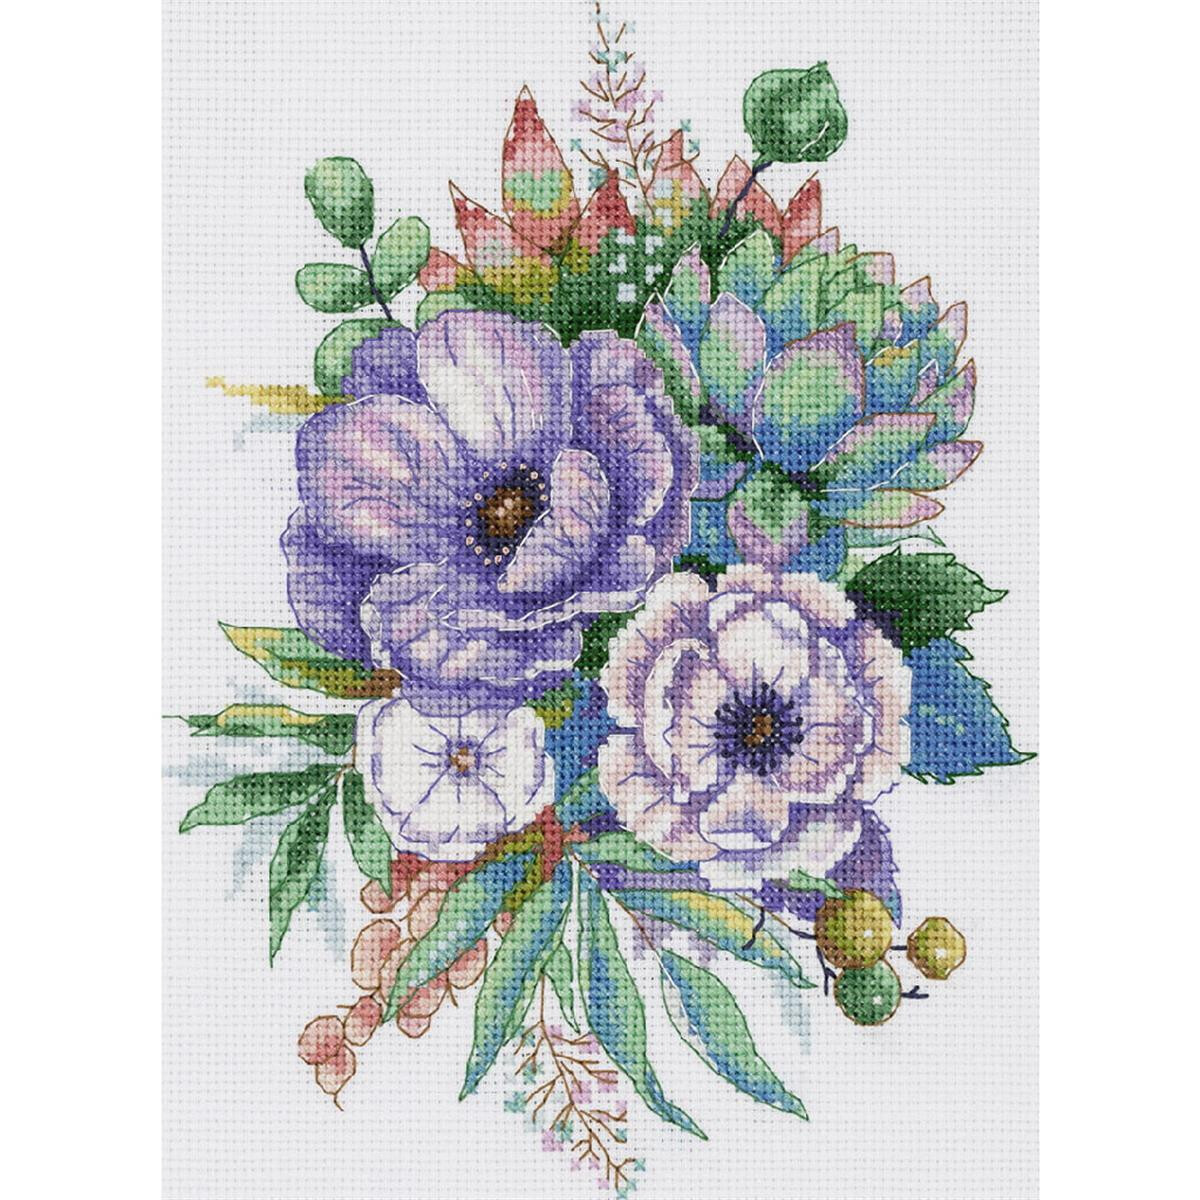 Panna counted cross stitch kit "Anemones and...